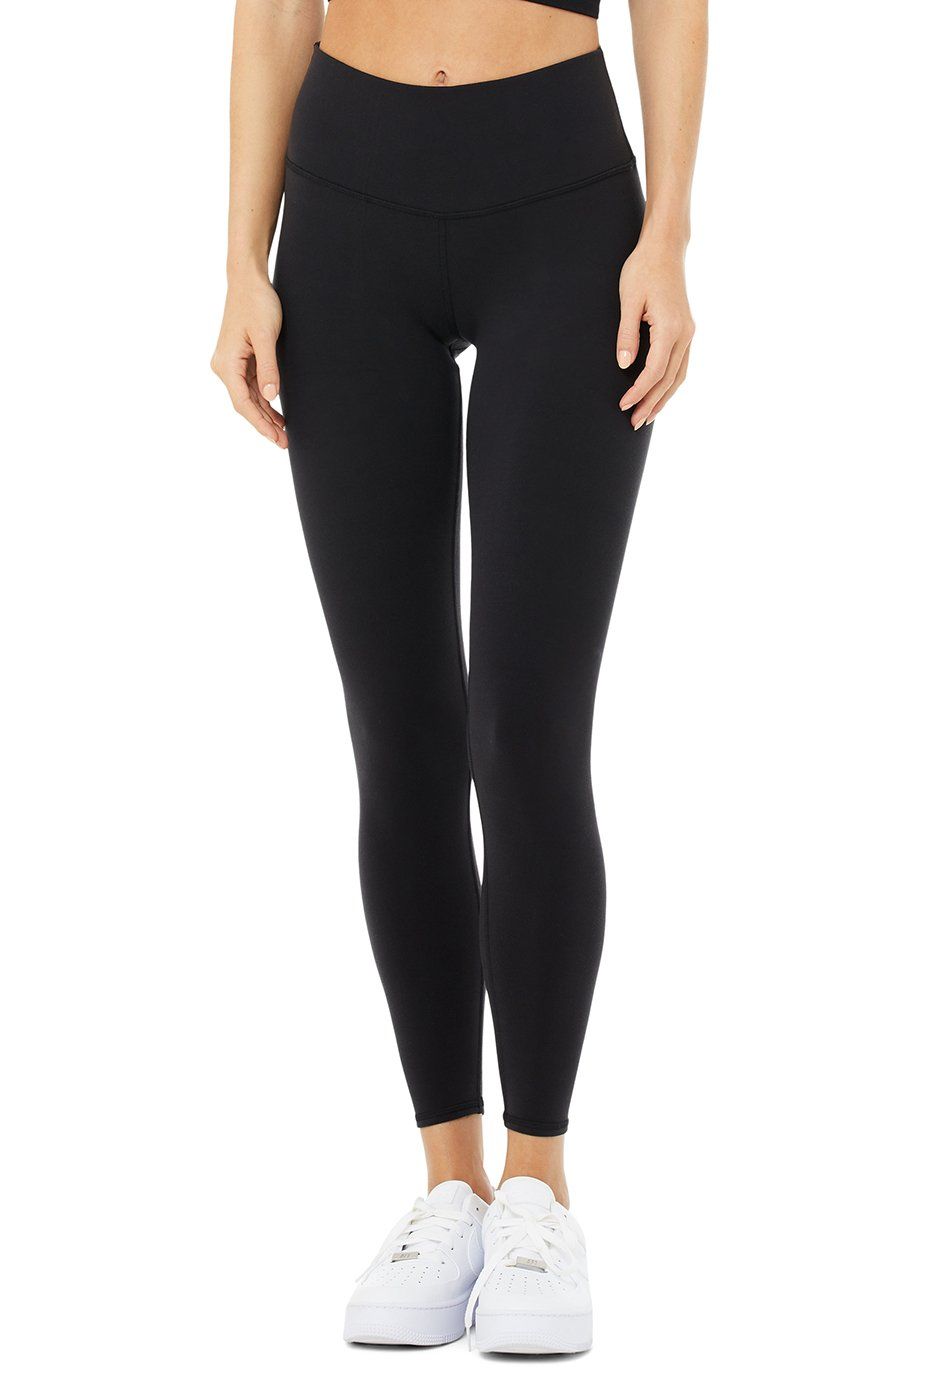 The High-Waist Leggings Dhani Lives in Even Though They're